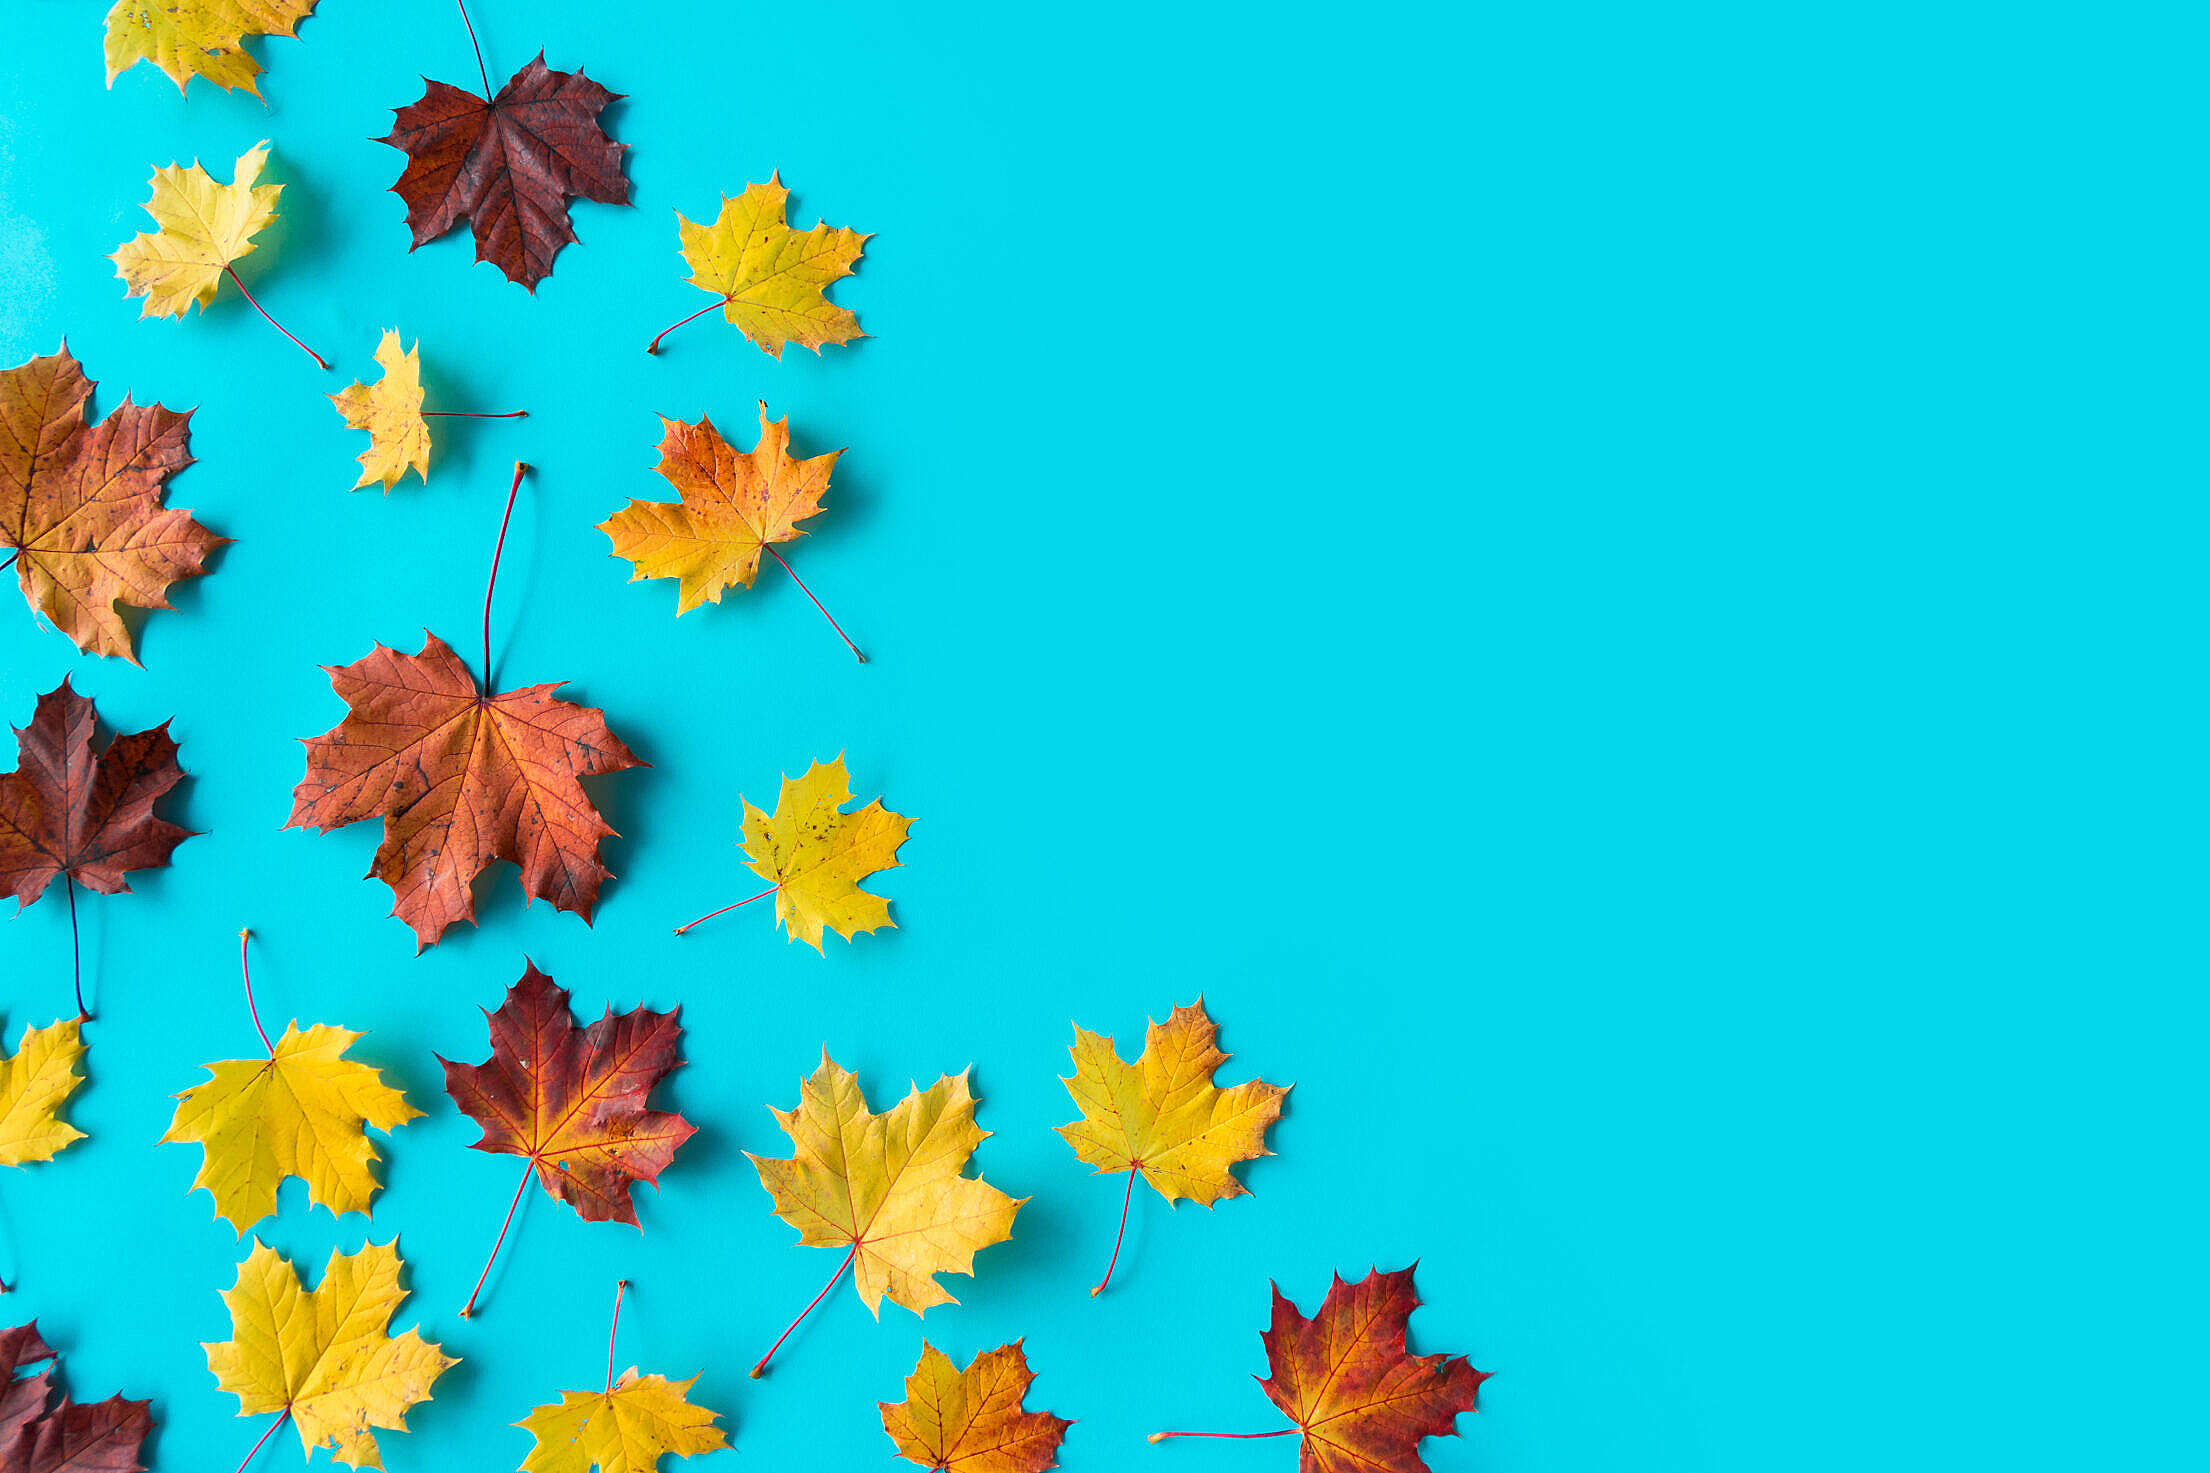 Autumn Leaves on Flat Blue Background with Room for Text Free Stock Photo